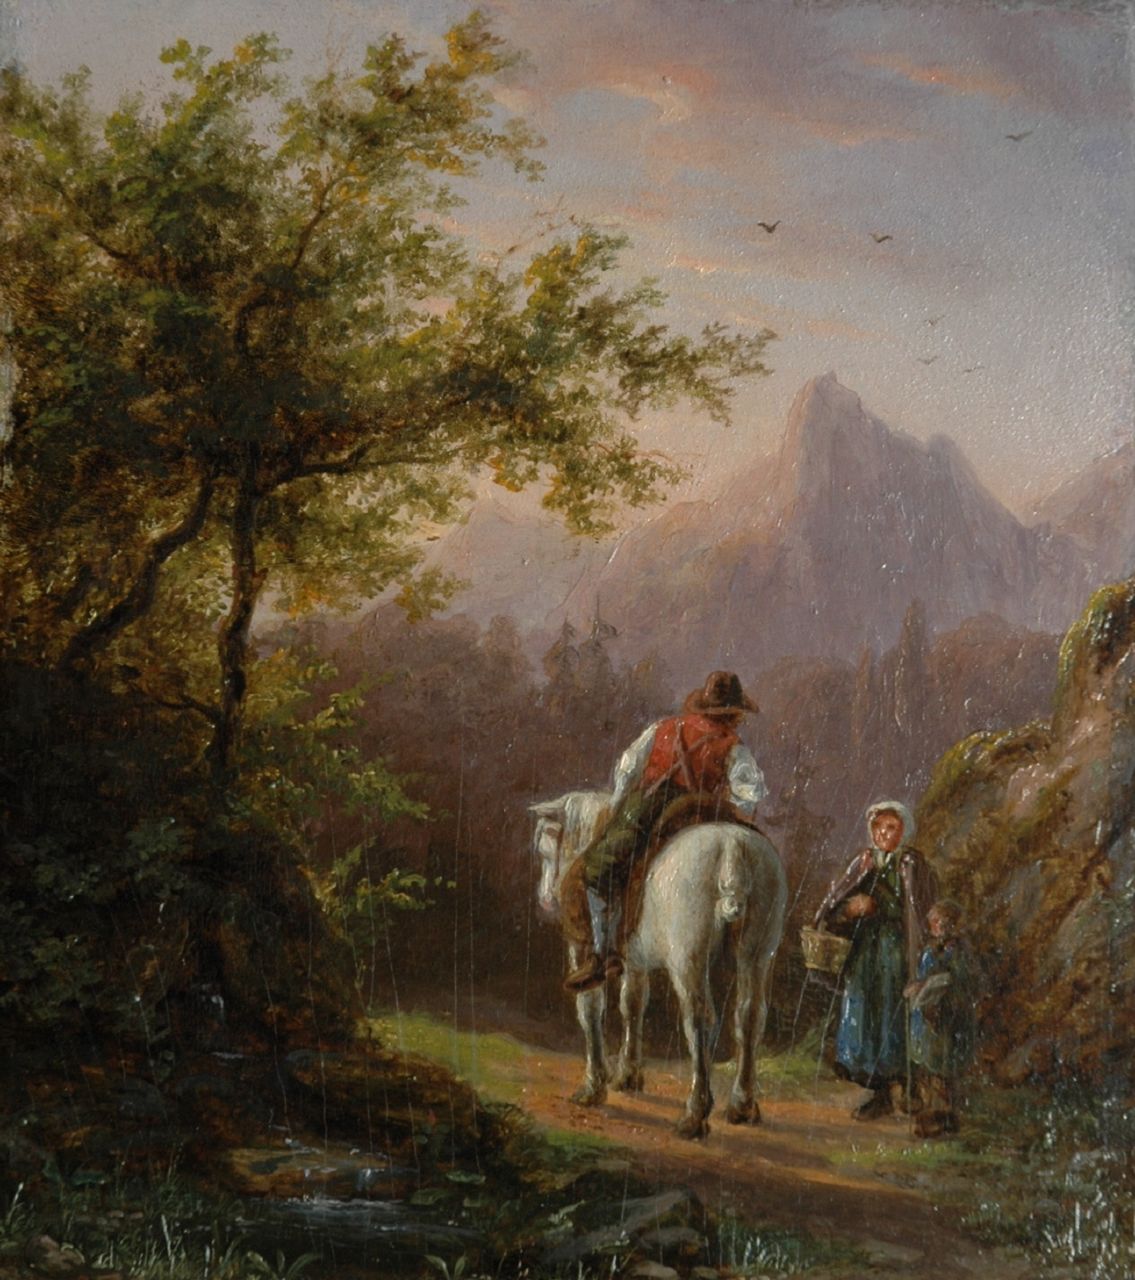 Sandick A. van | Anna van Sandick, A traveller and peasant woman in the mountains, oil on panel 19.4 x 17.1 cm